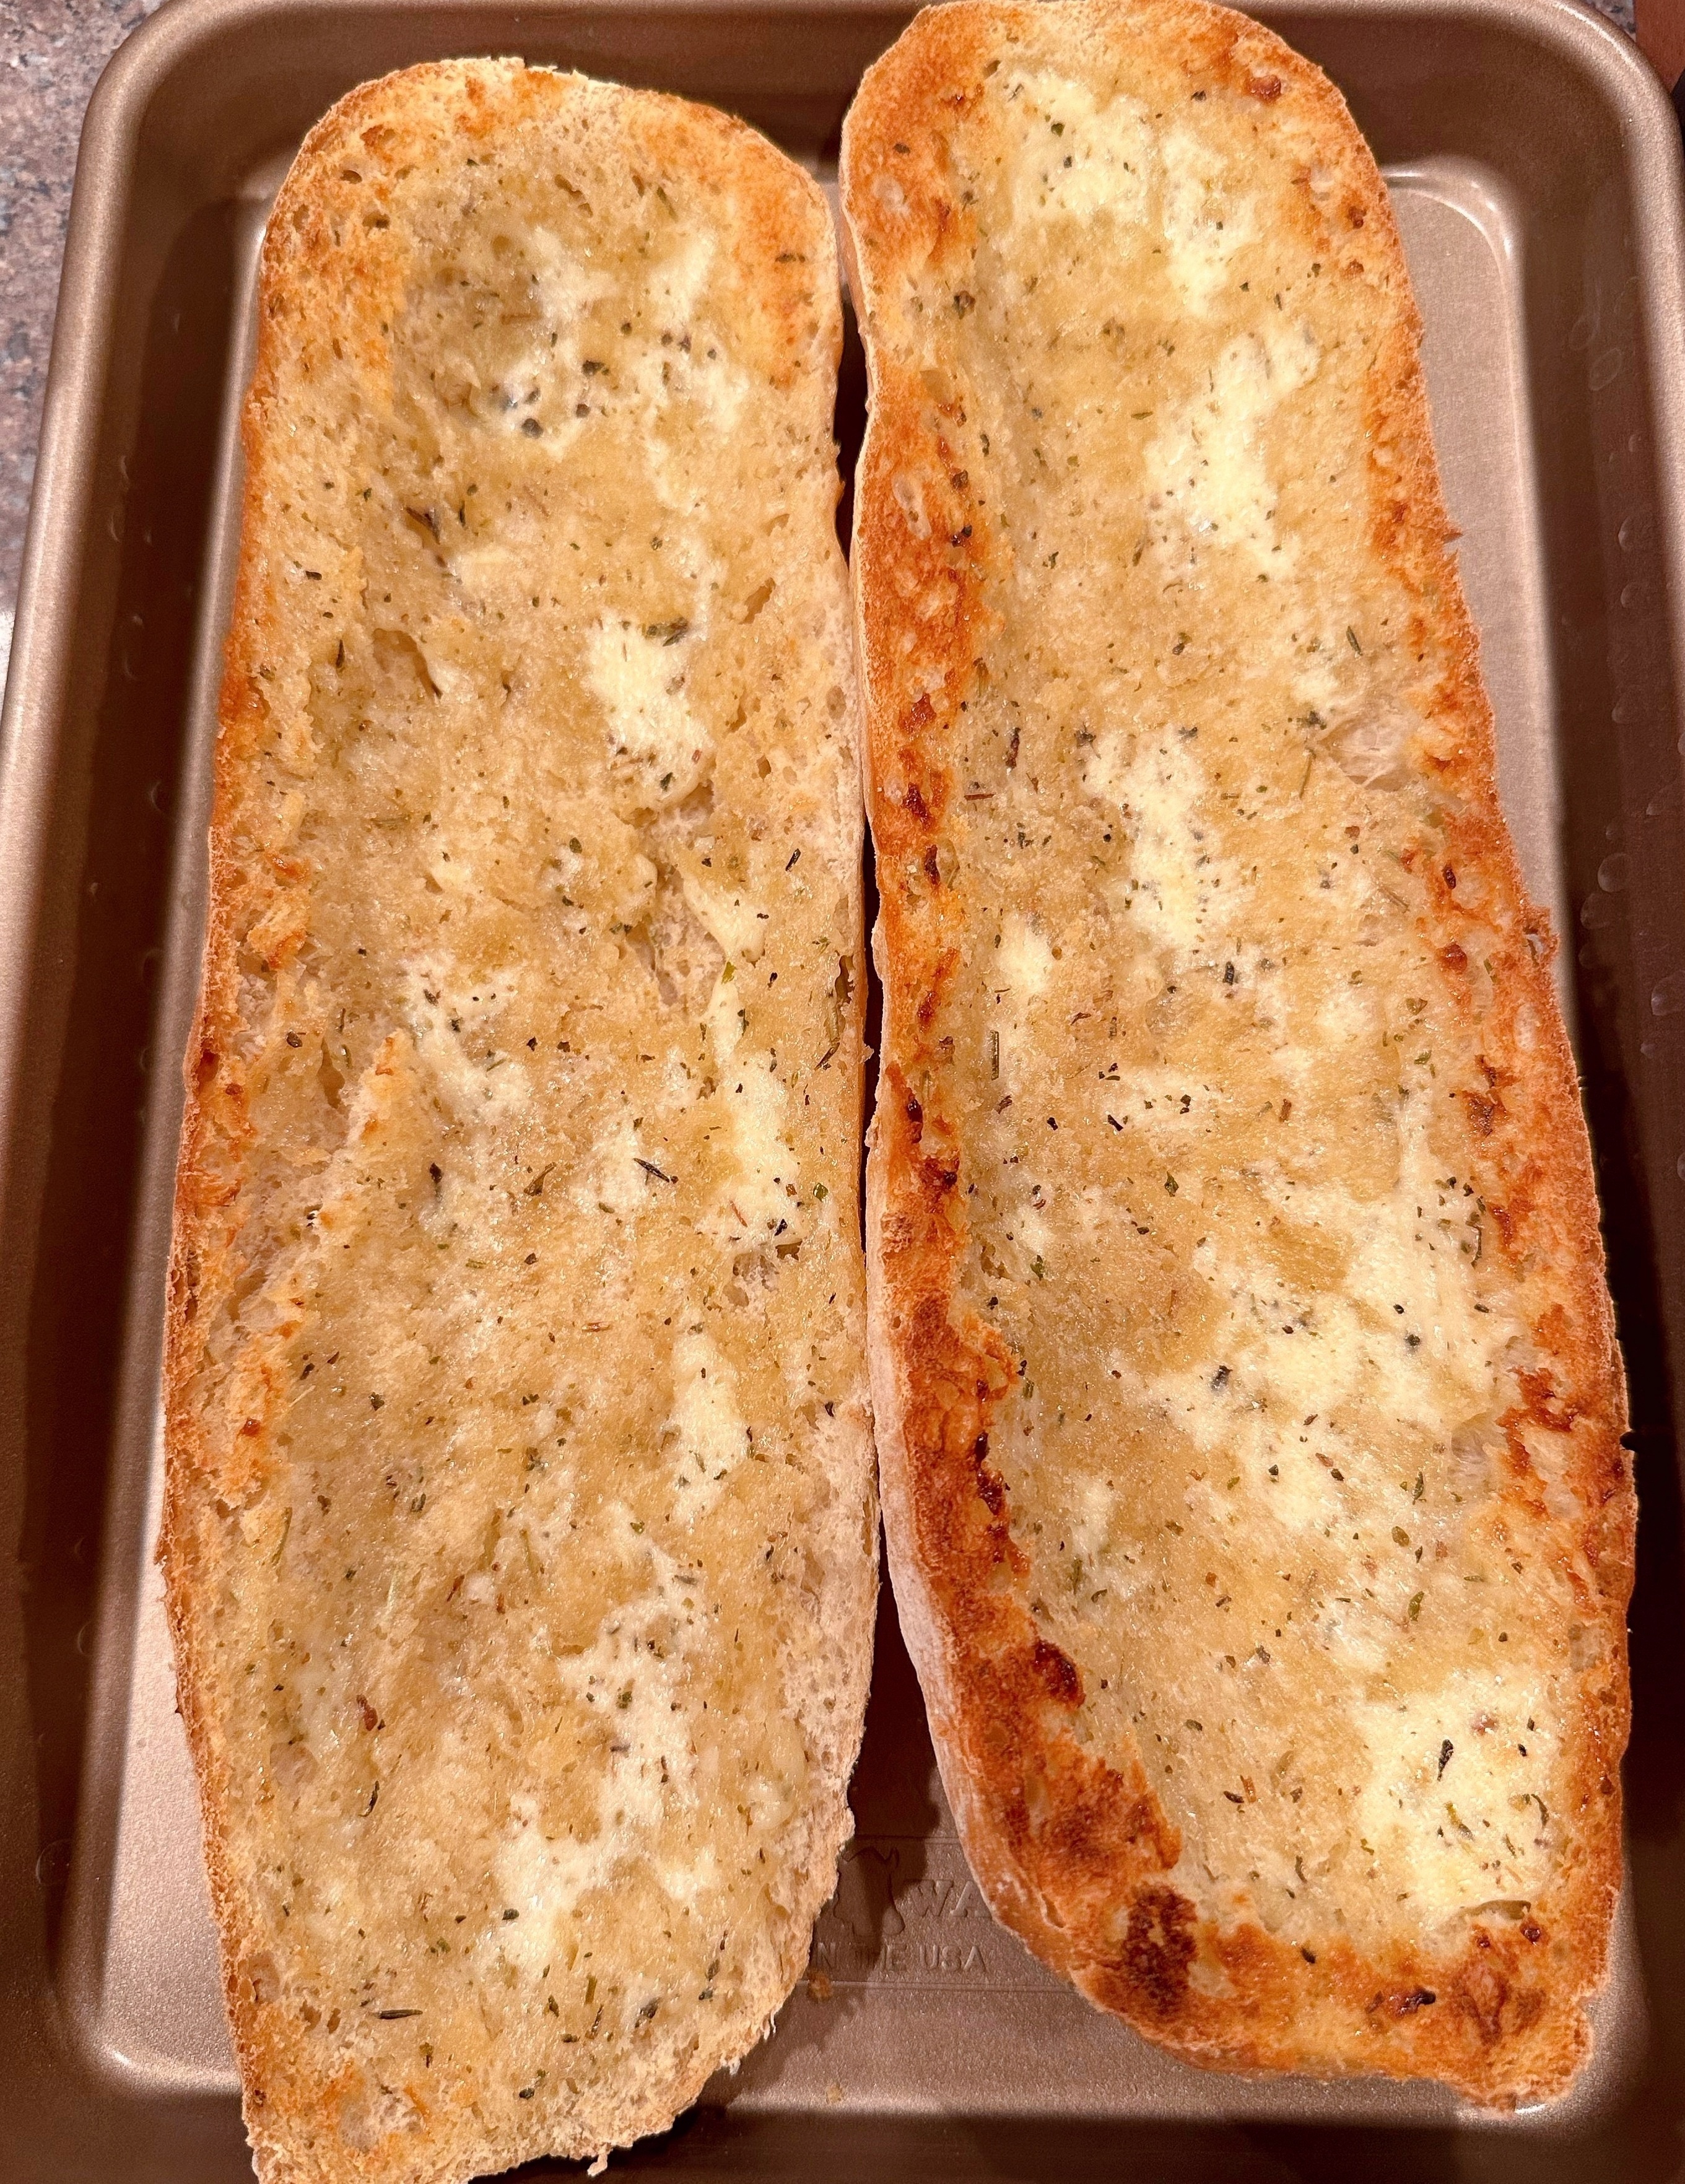 Toasted Italian Bread for Grinder Sandwich.